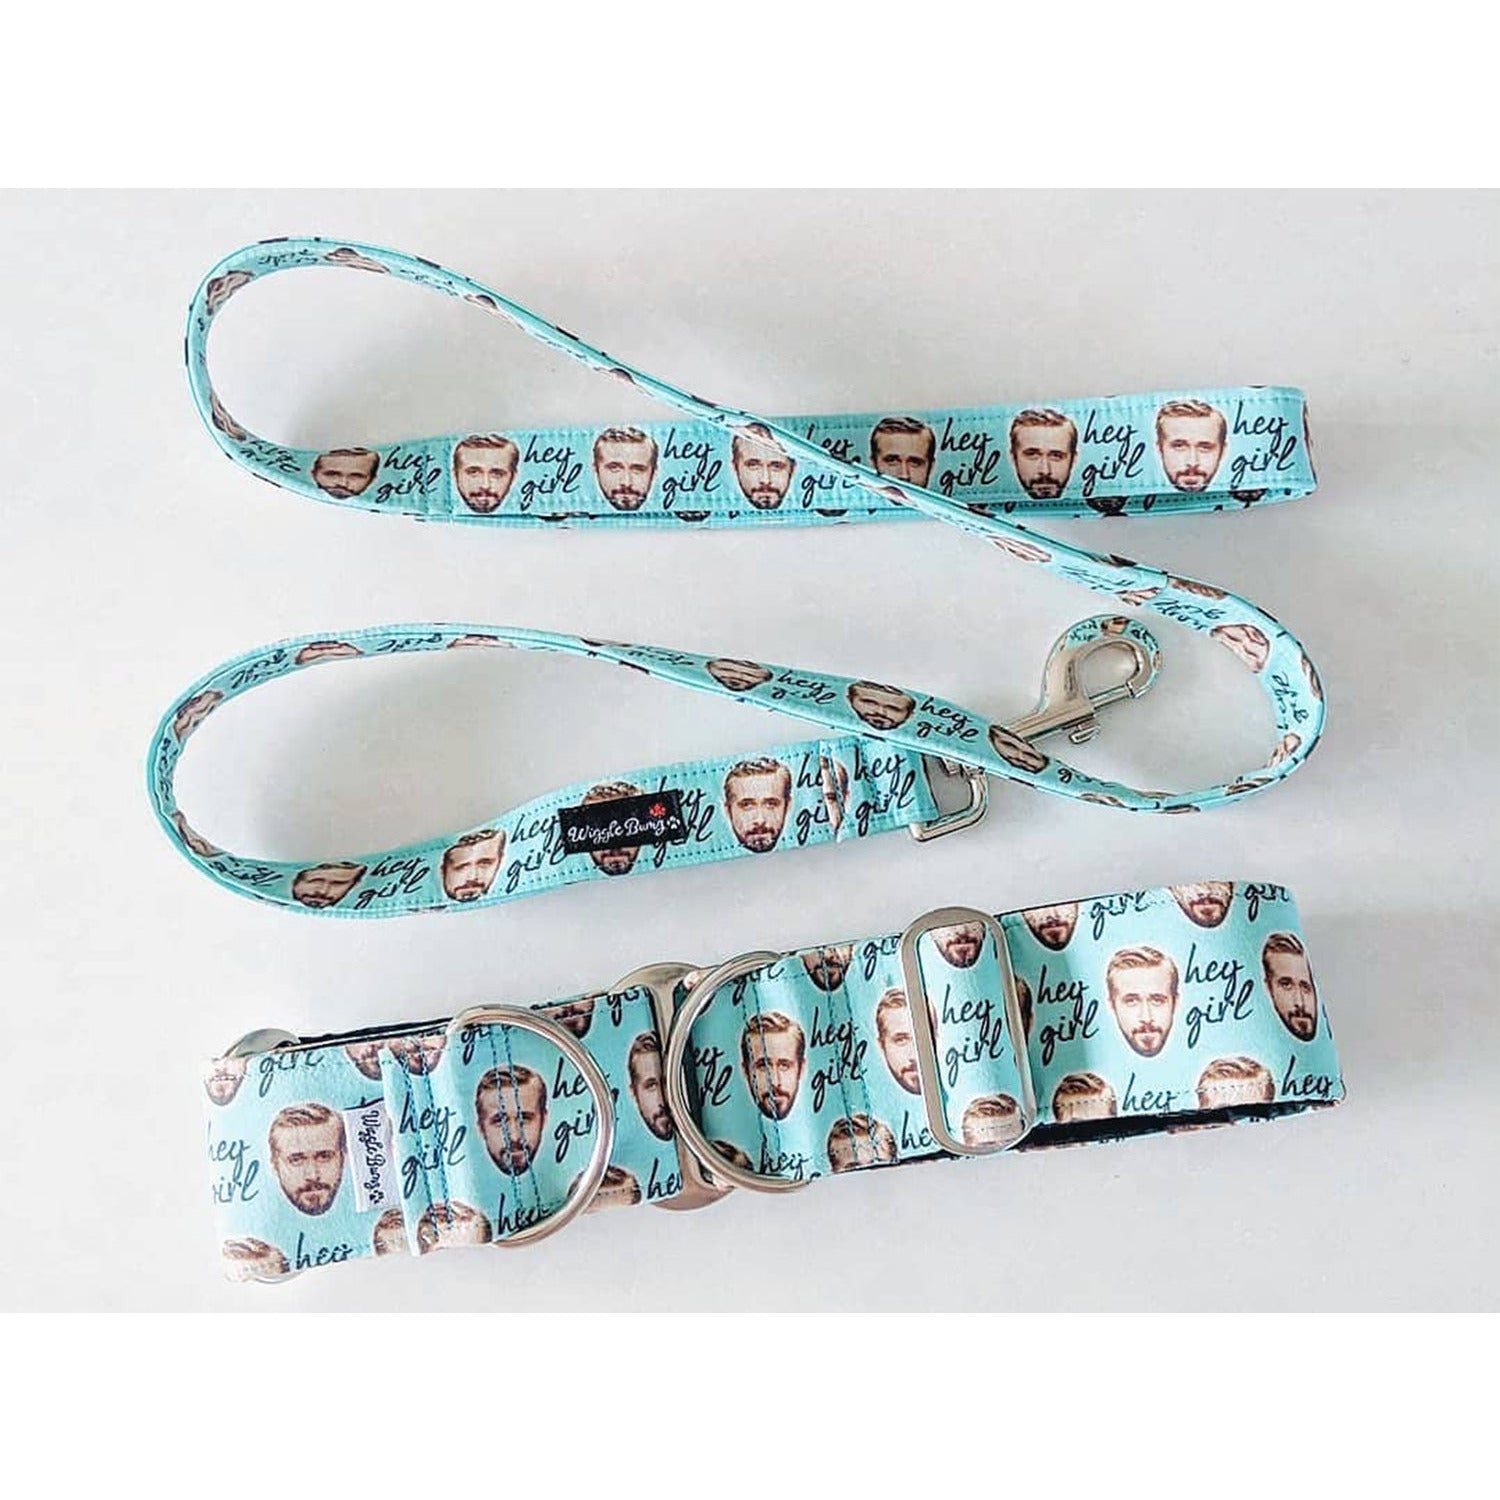 Looking for a matching leash? Add this to your cart!